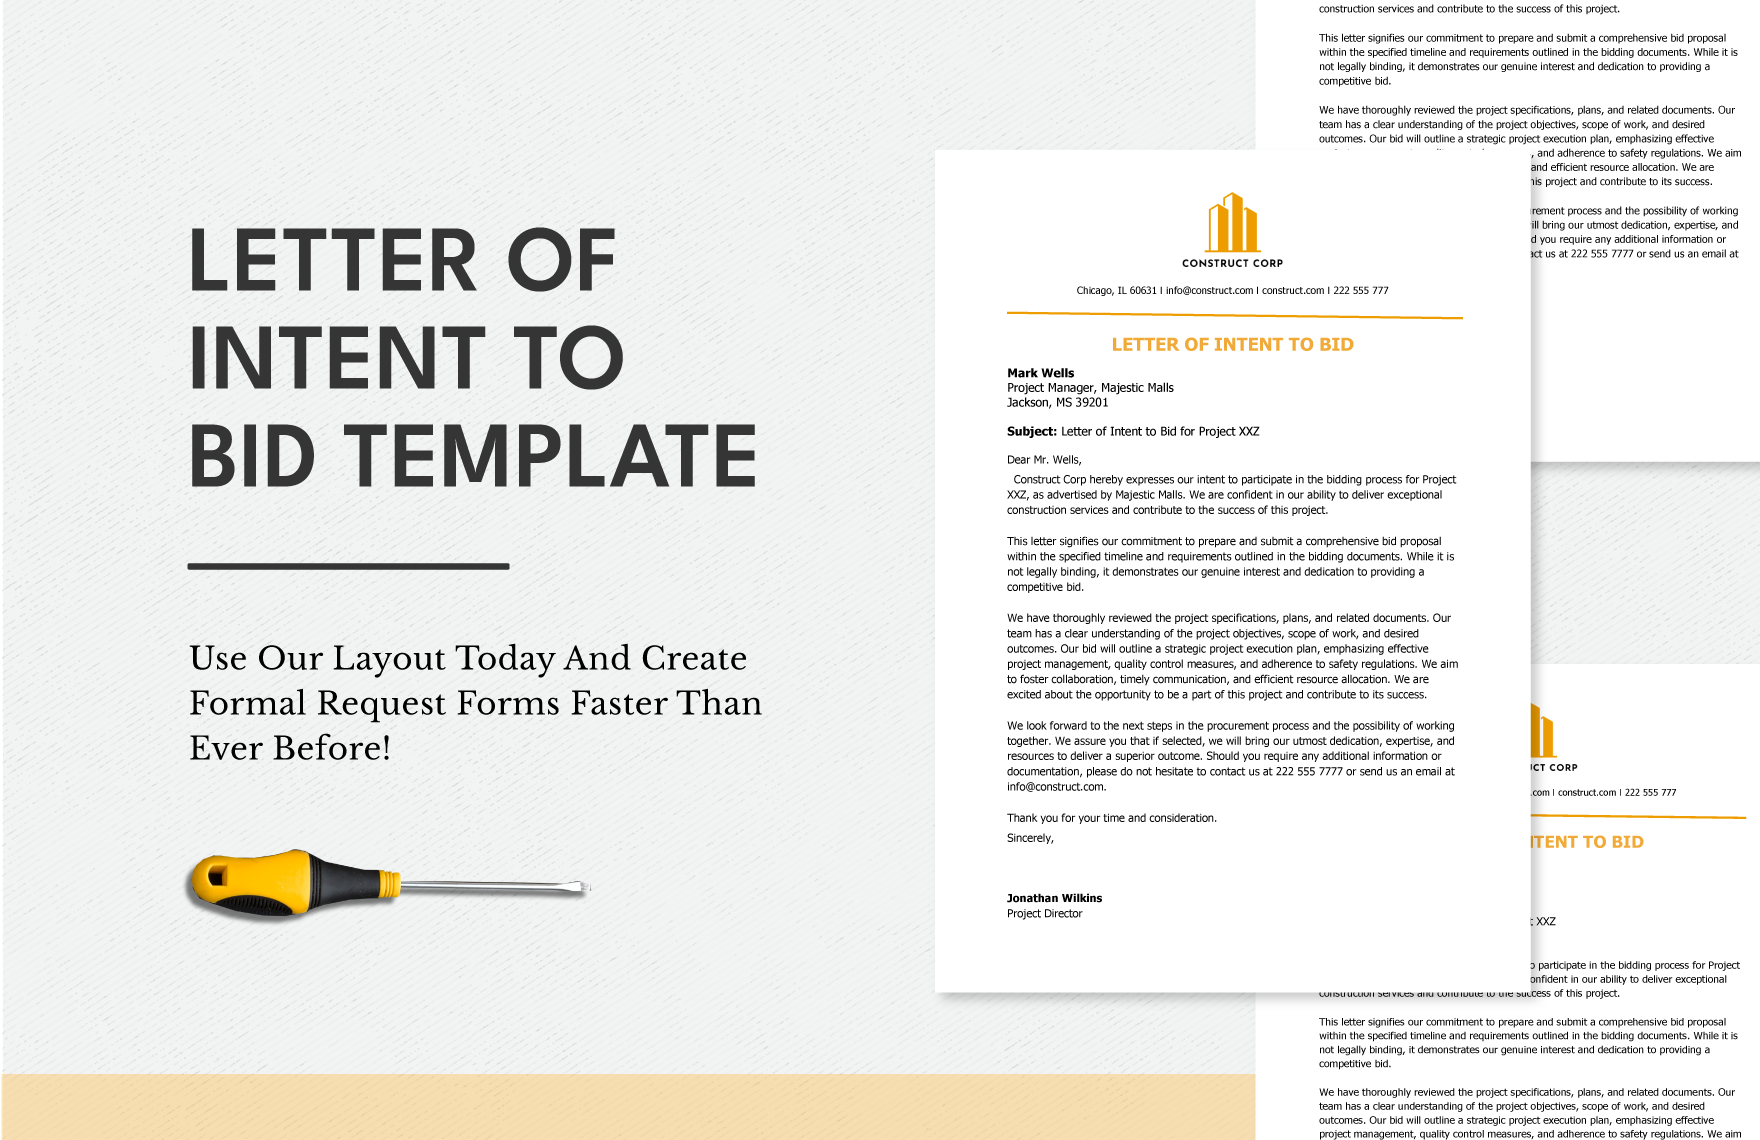 Letter of Intent to Bid Template